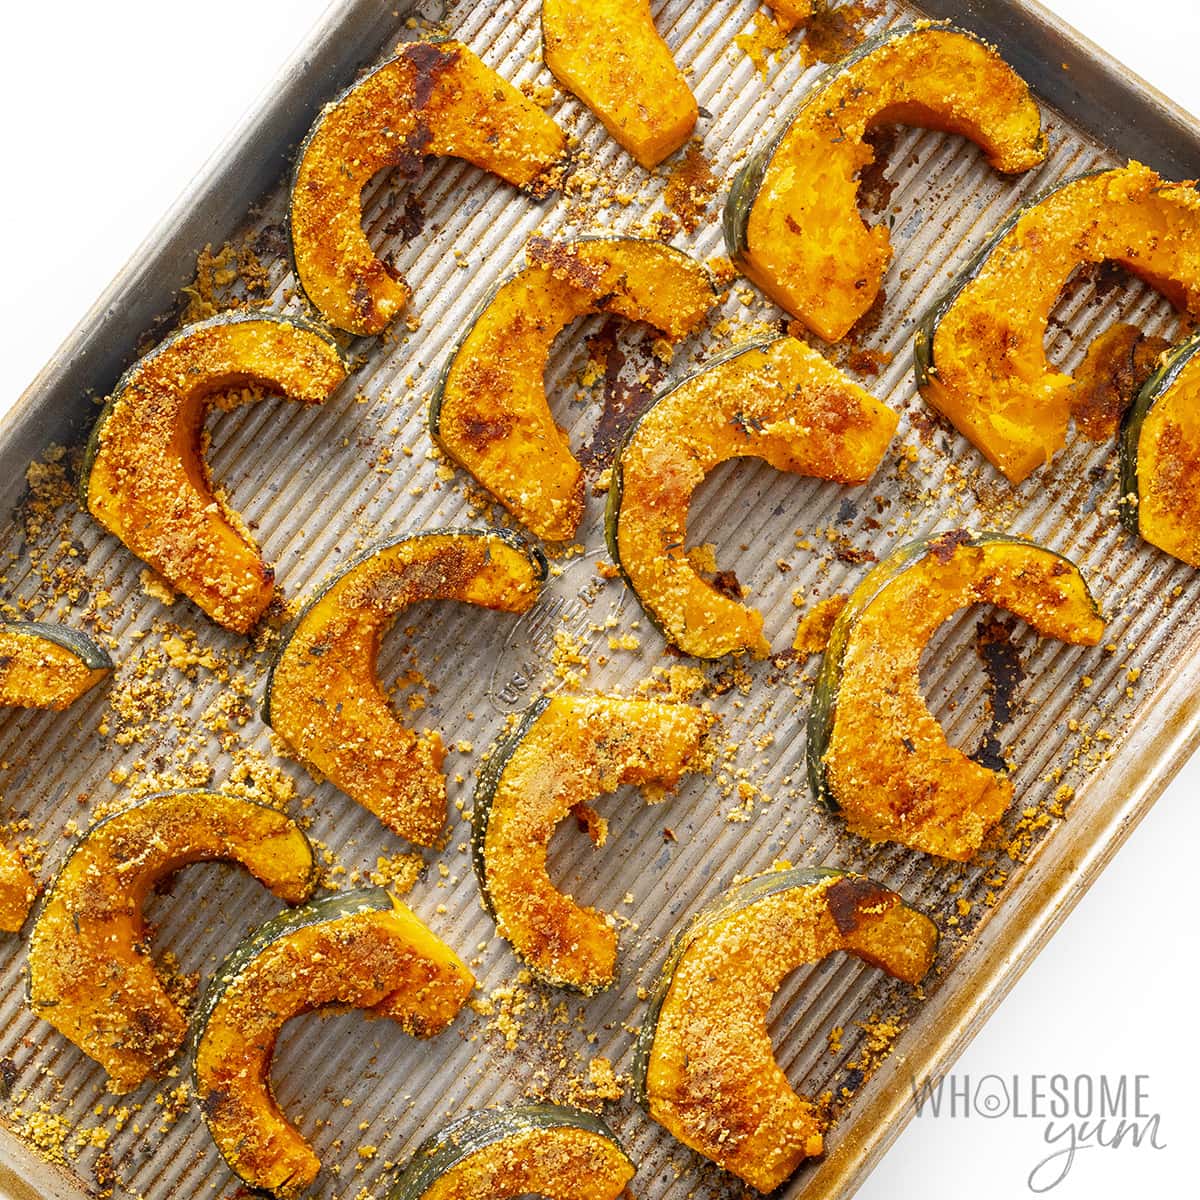 Roasted buttercup squash on a baking sheet.